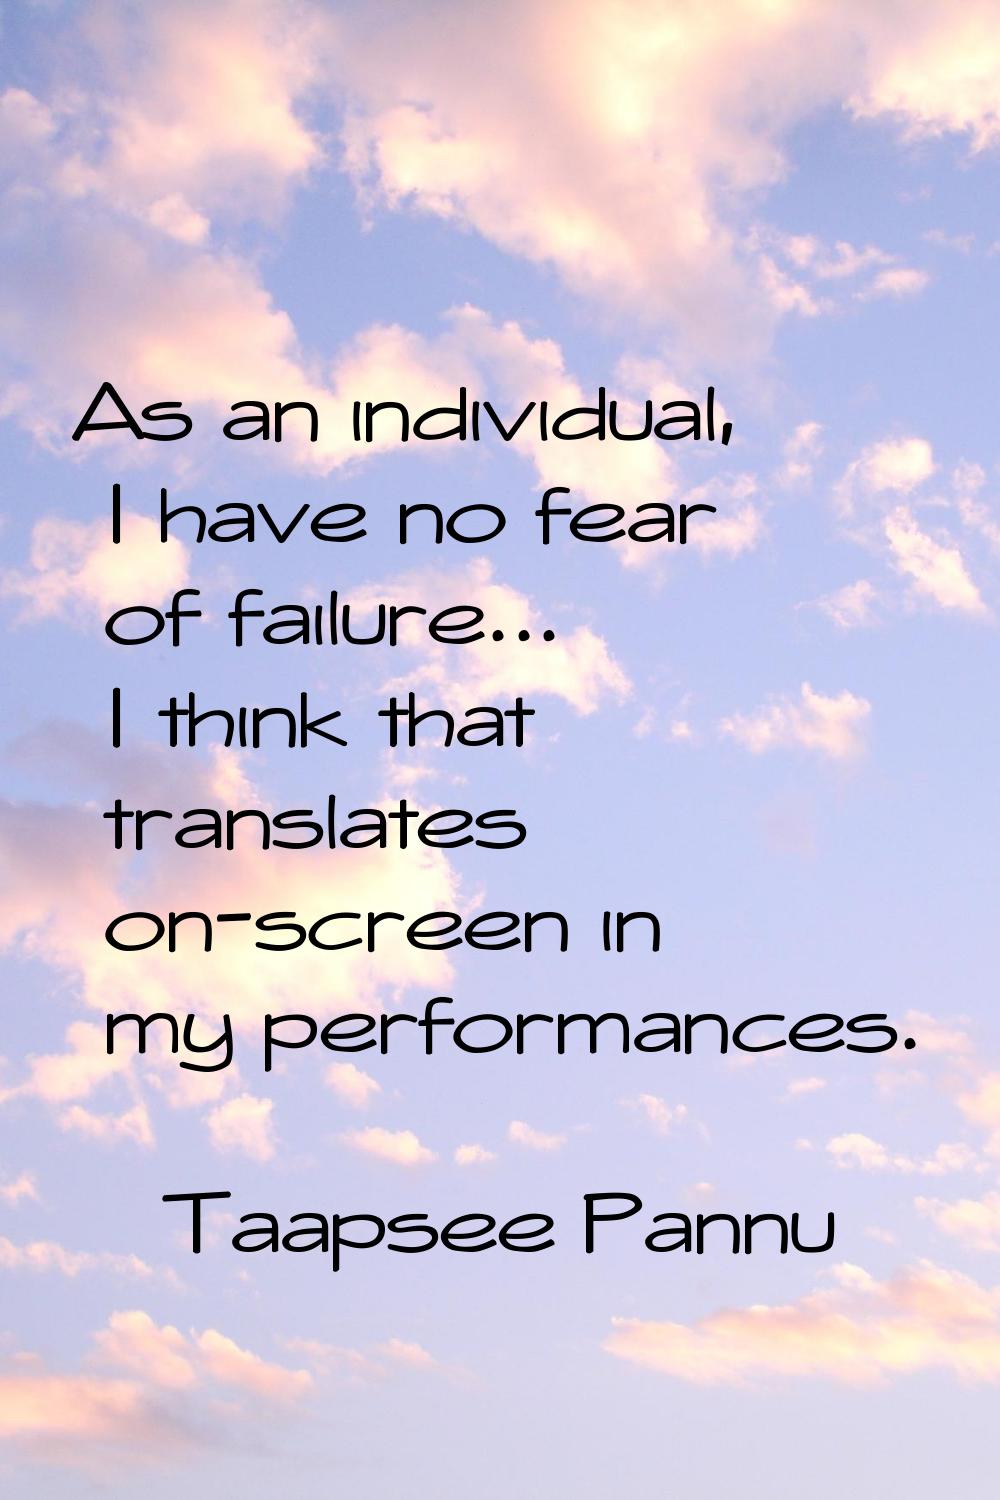 As an individual, I have no fear of failure... I think that translates on-screen in my performances